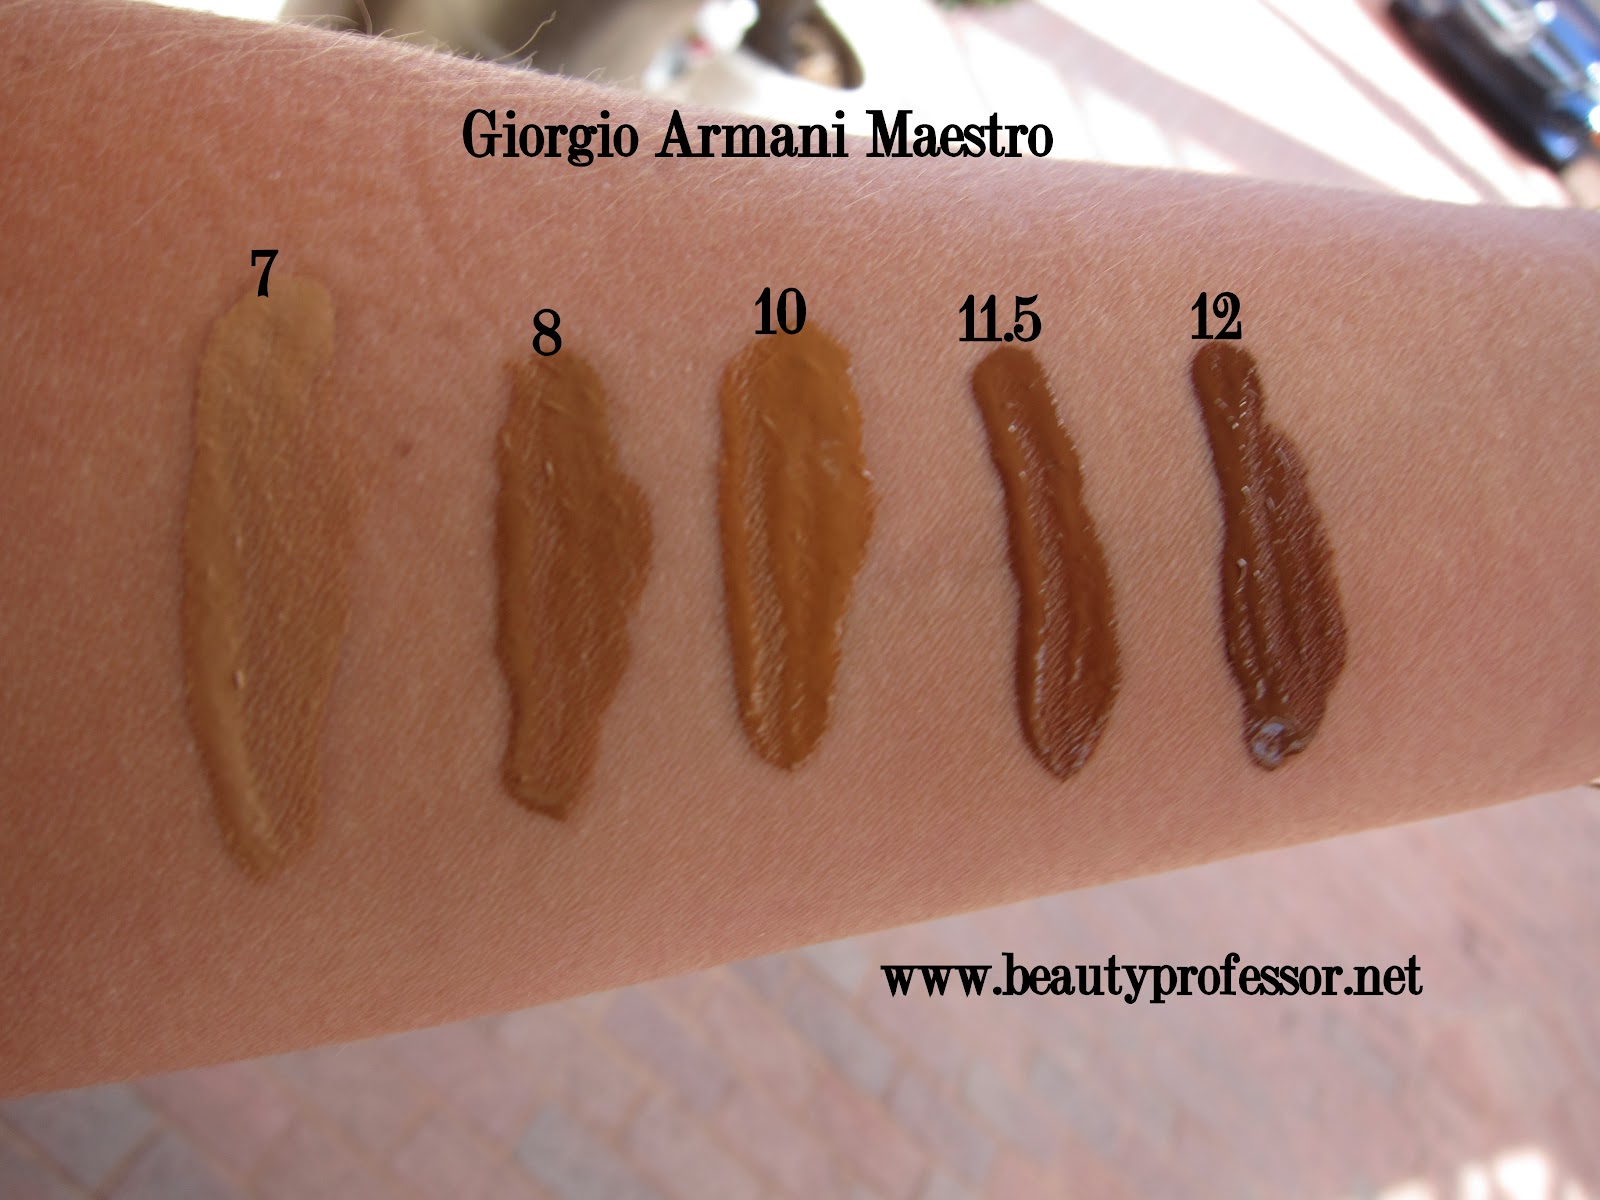 Beauty Professor Giorgio Armani Maestro Fusion Makeup All Shades Swatched,Design And Control Of Concrete Mixtures 8th Pdf